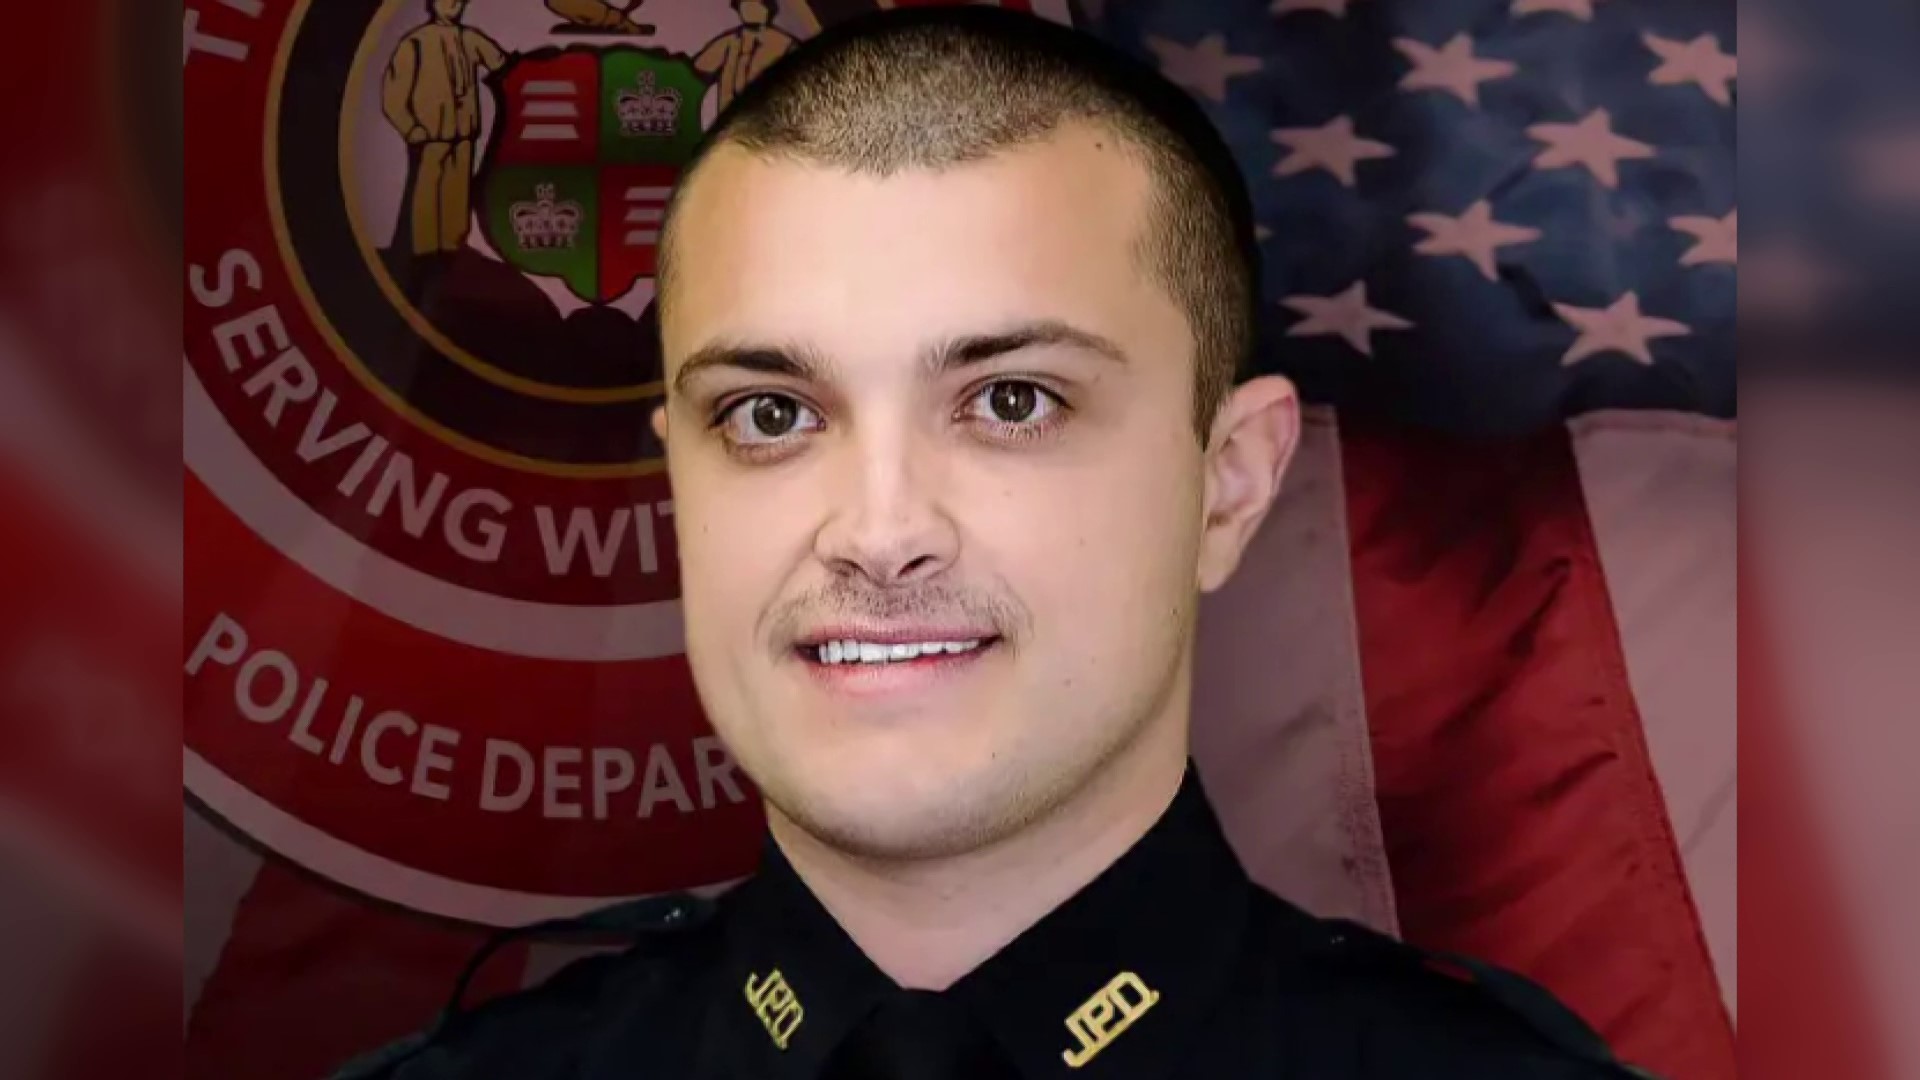 As an organ donor, Officer Jake Reed saved the lives of four people, even after he died.